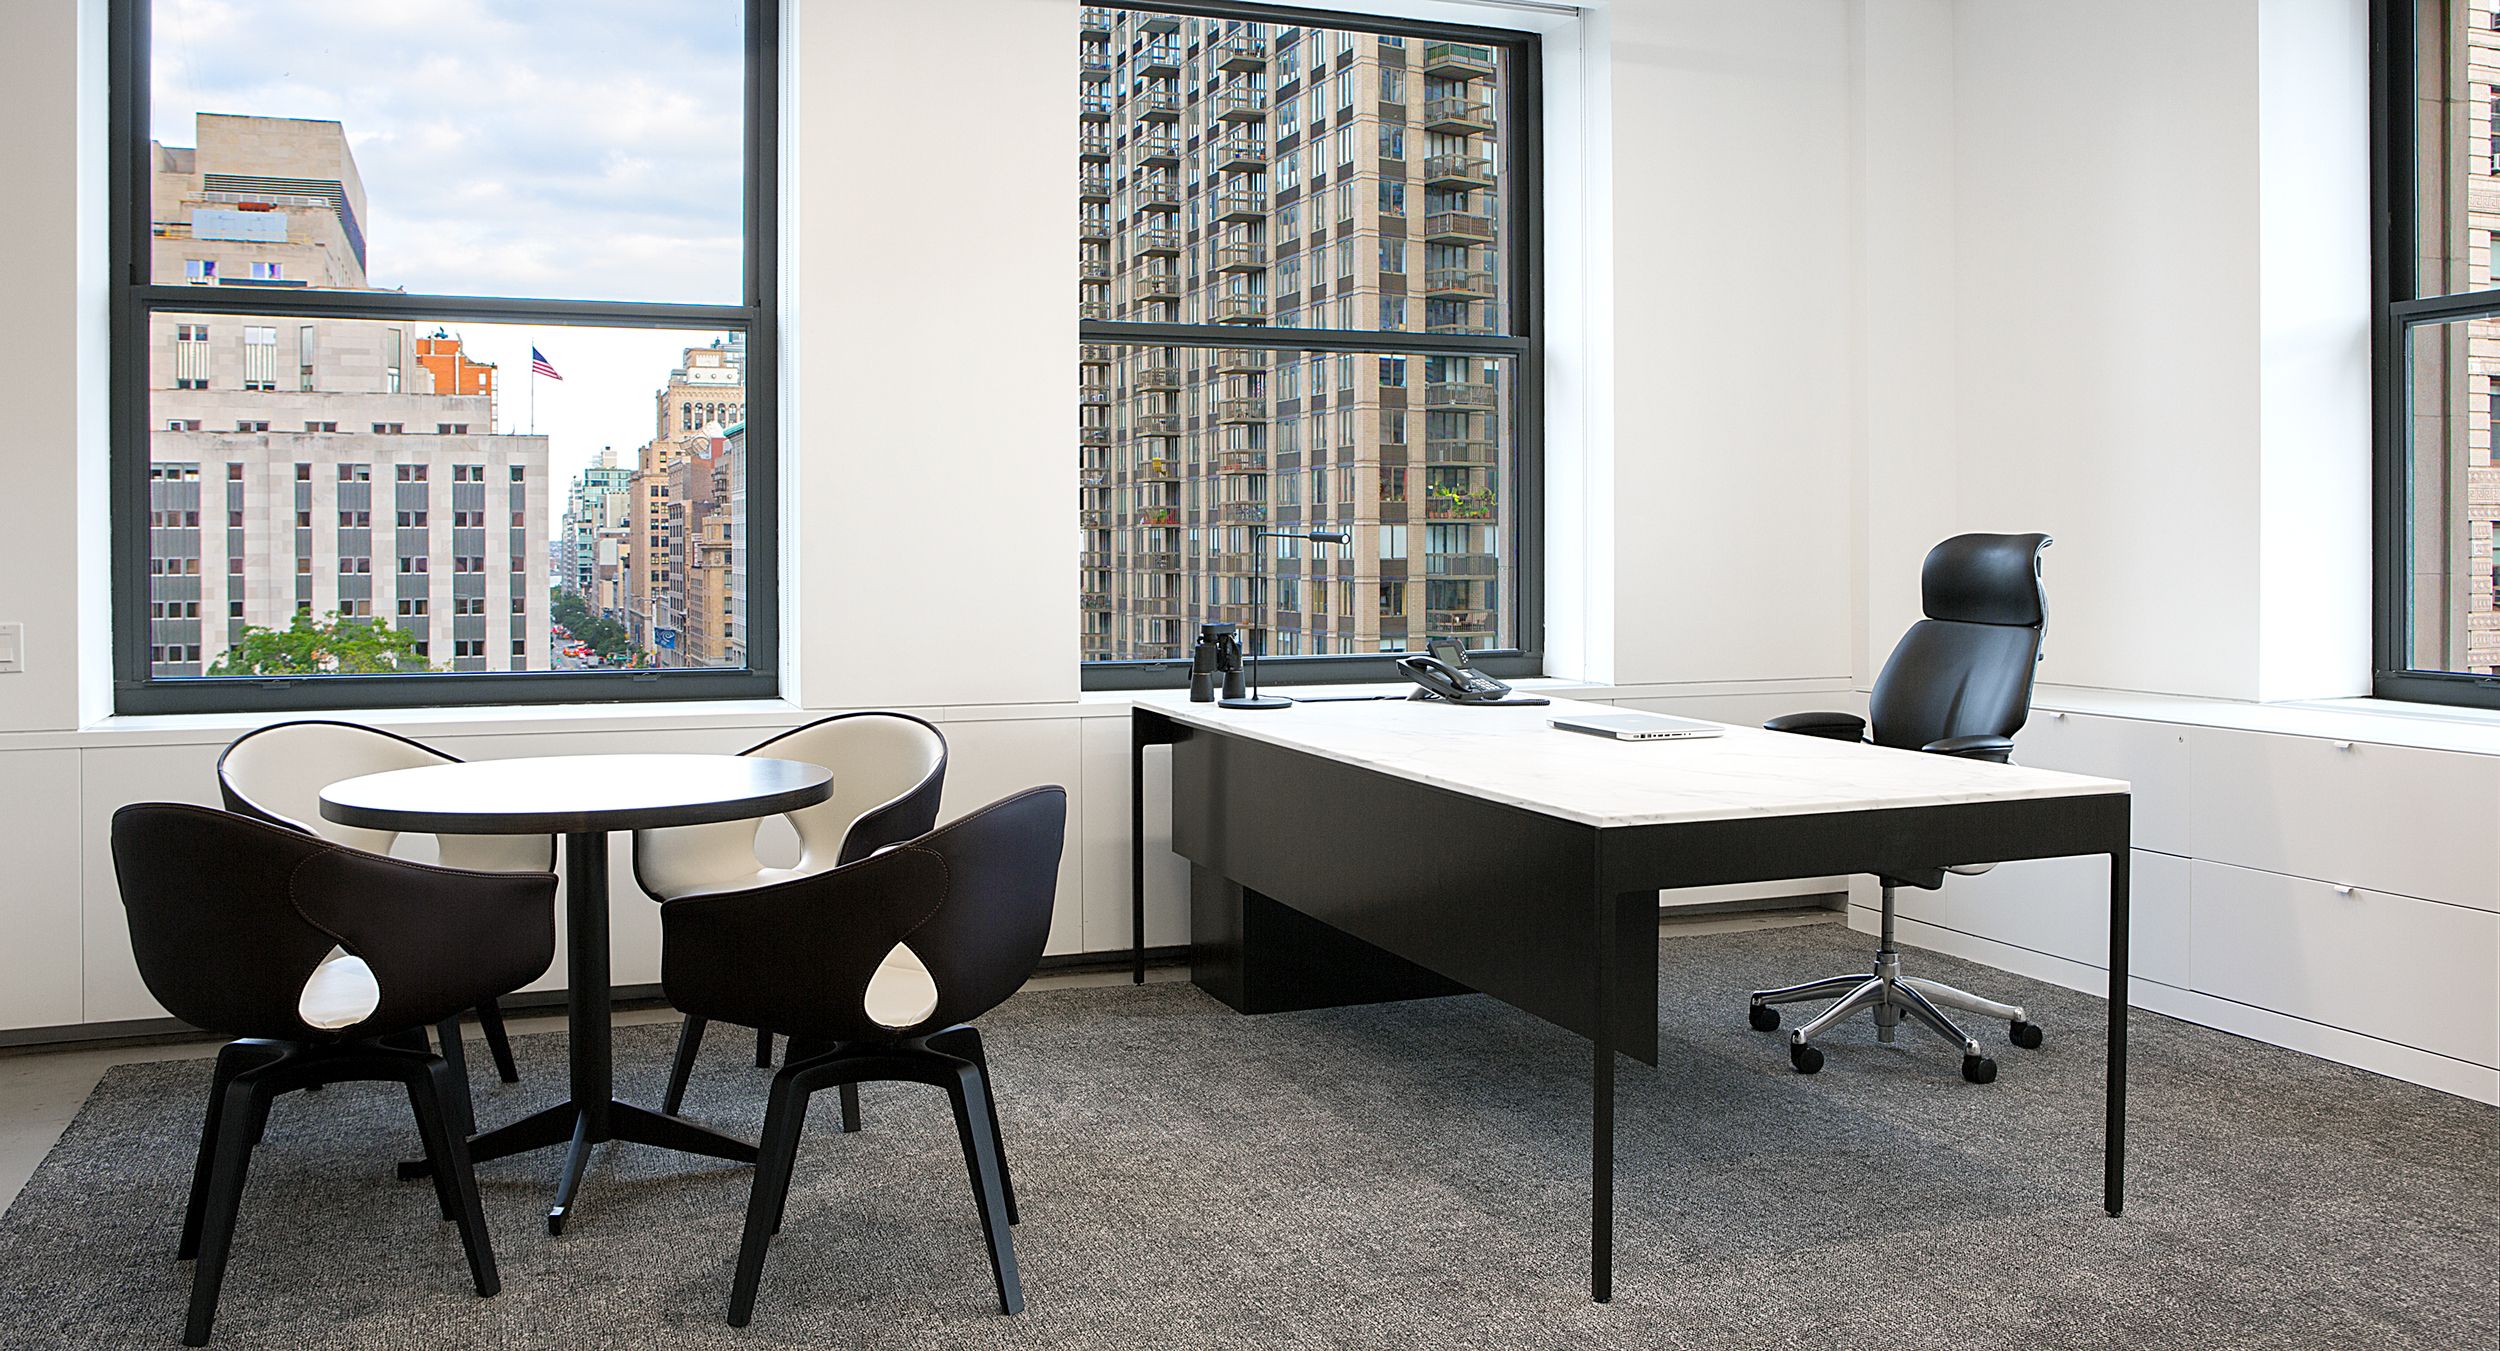 Private offices feature White Corian and glass paired with bronze table legs.